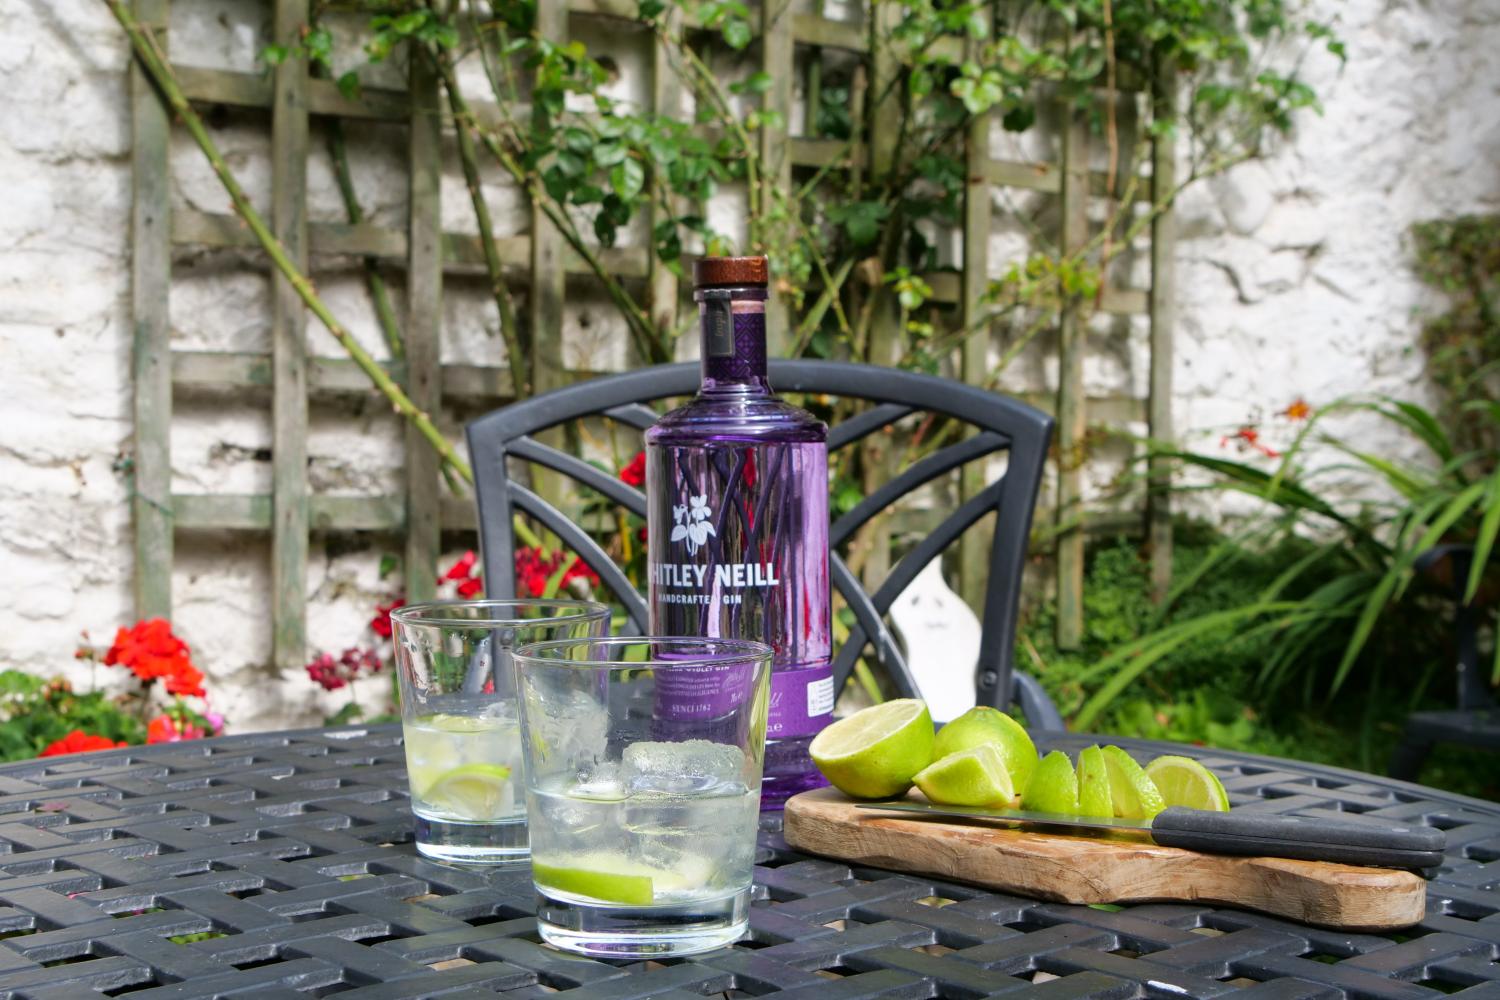 Time for a G&T in the pretty courtyard.